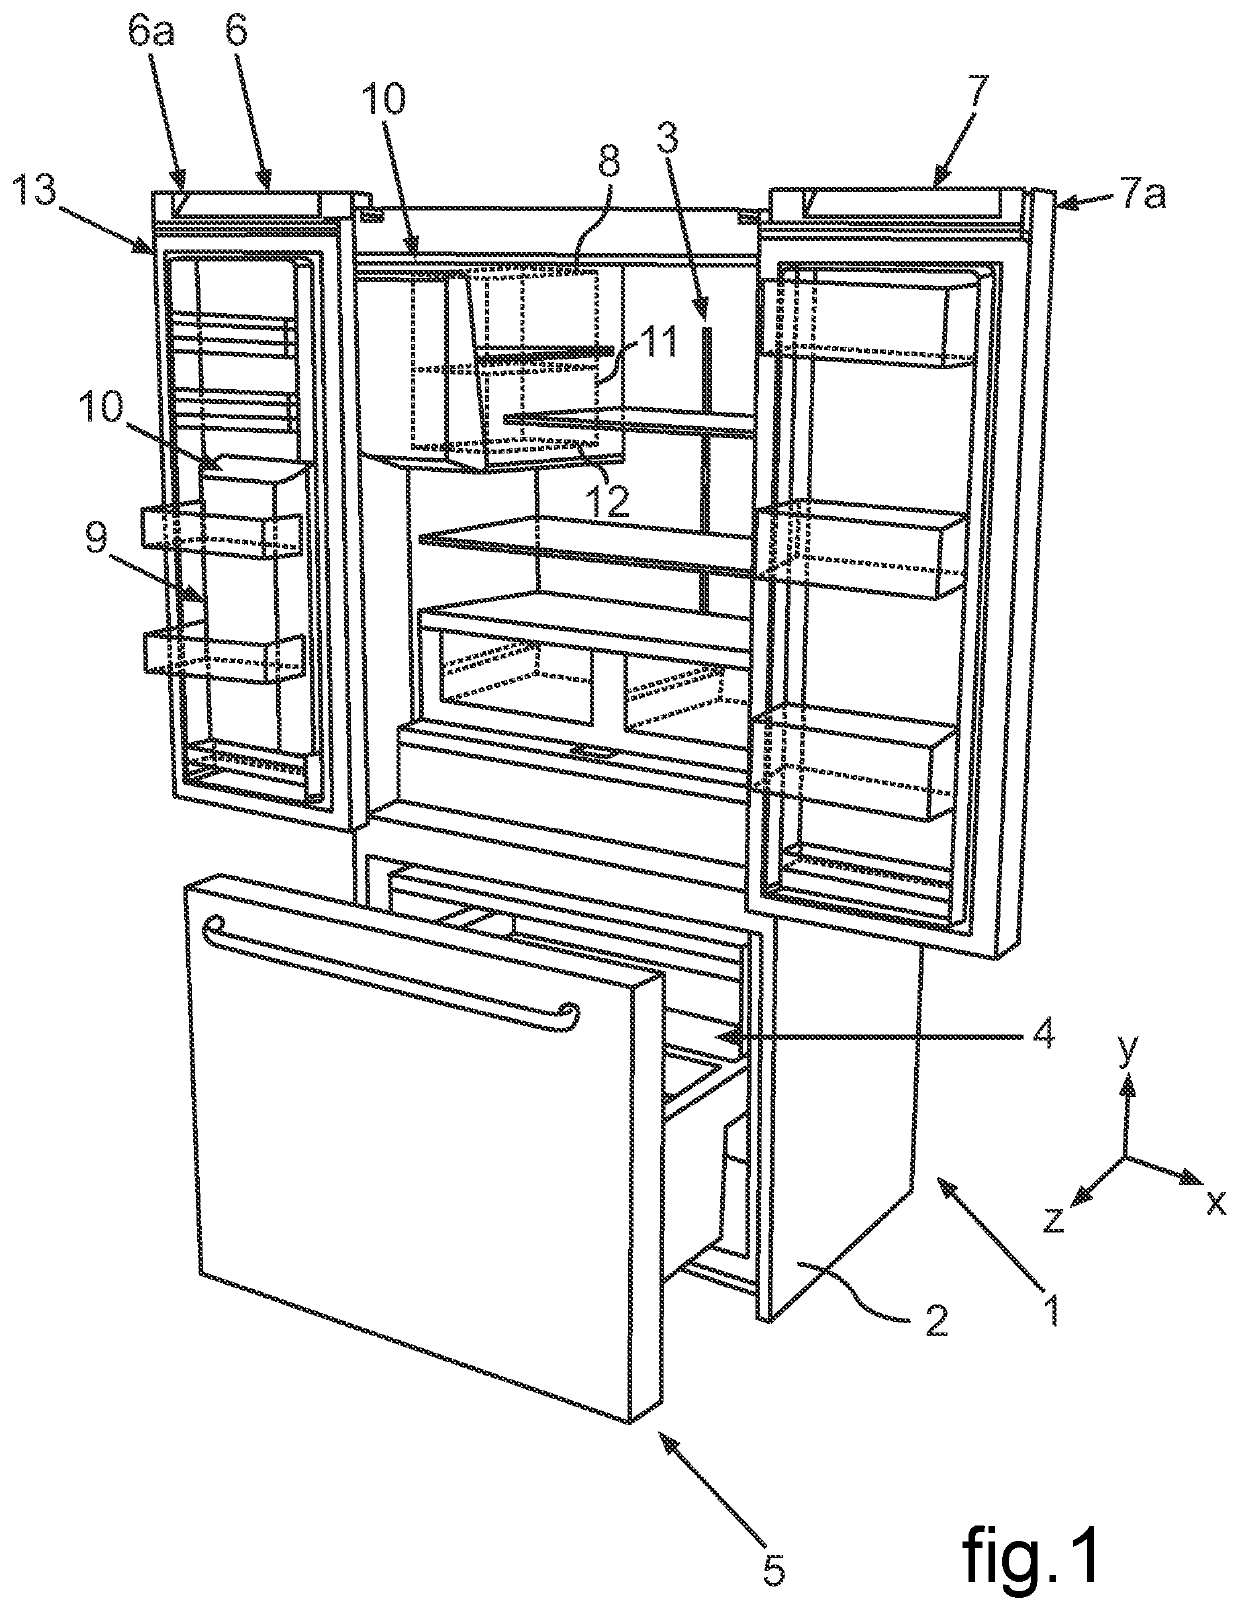 Household cooling appliance comprising an ice maker unit and a display unit for displaying the weight of ice made